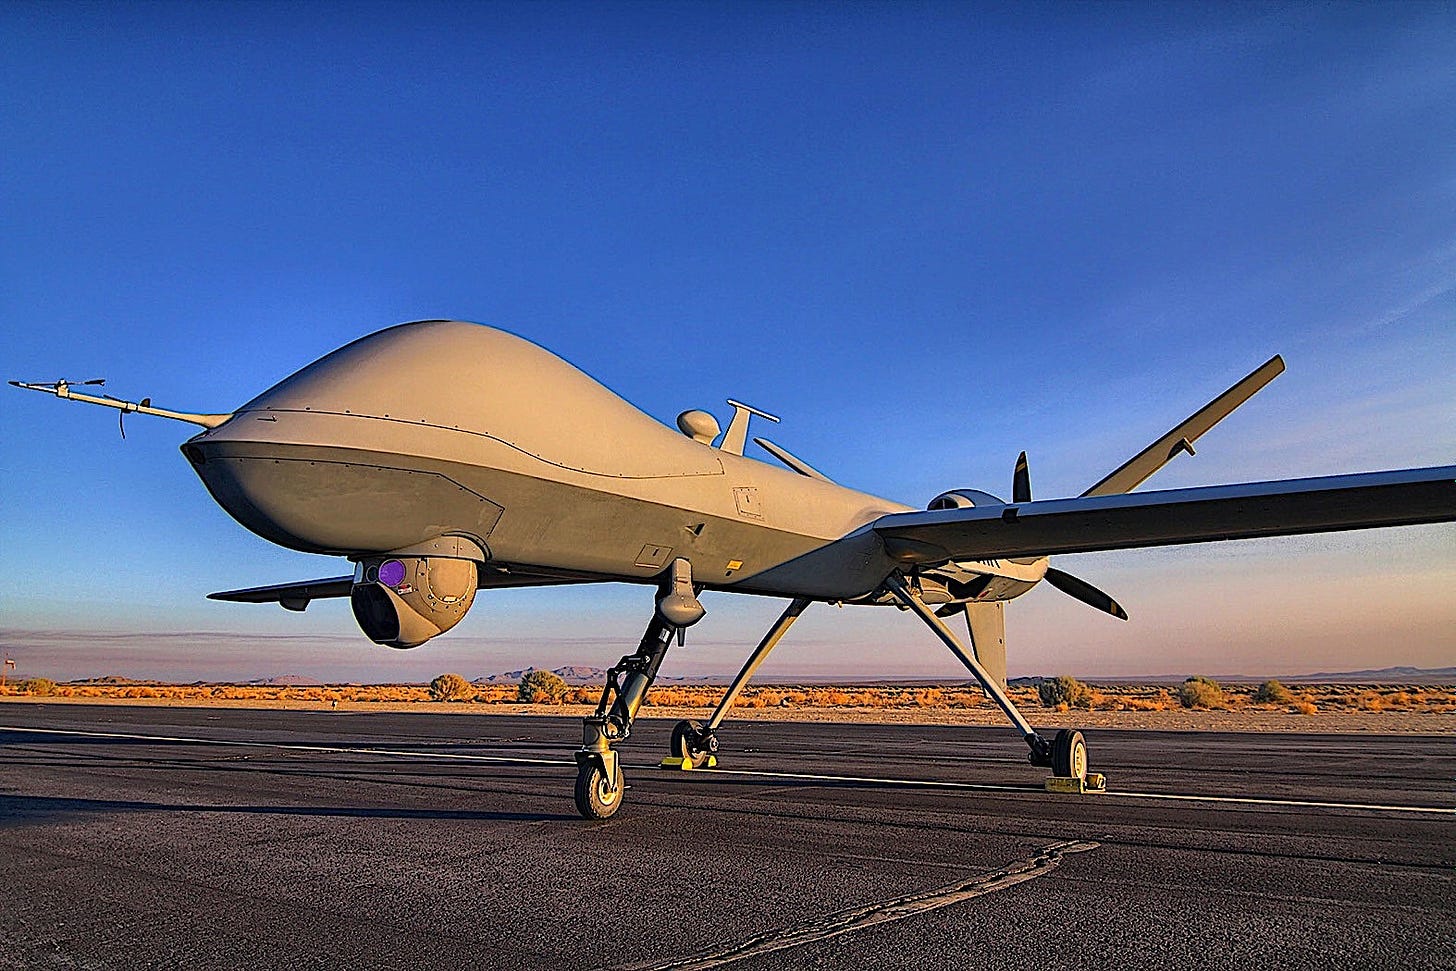 Reaper Drones May Be Headed for Ukraine, Report Says - autoevolution